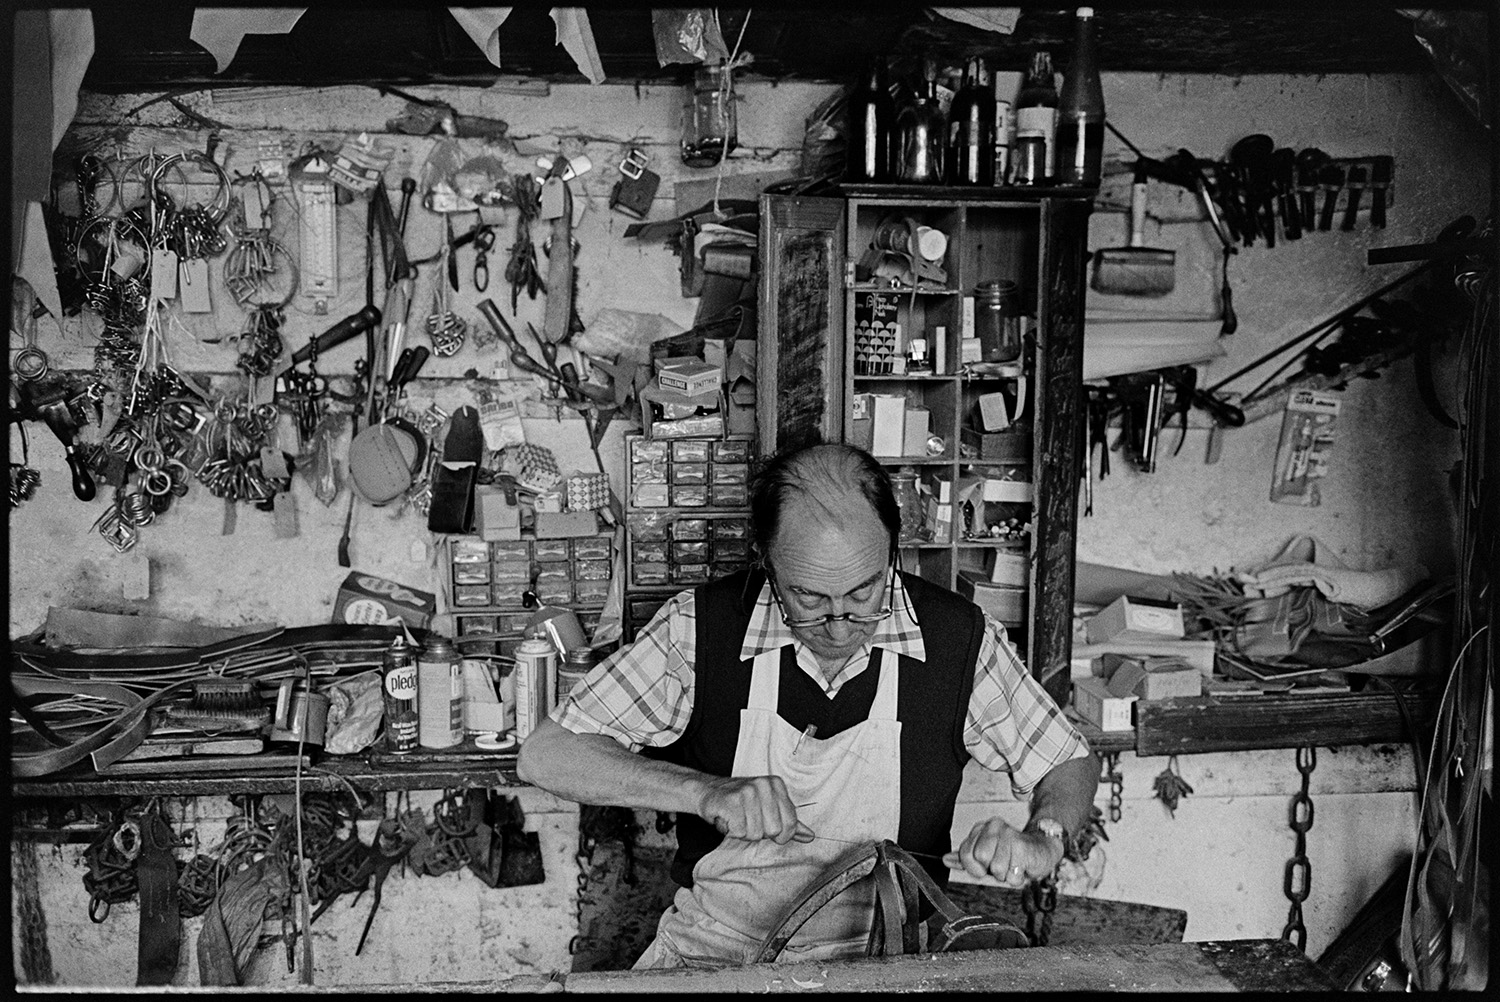 Saddler in his workshop, tools materials, goods on display. 
[Derek Johns, a saddler, making leather goods in his workshop in Buttgarden Street, Bideford. Various tools are hung up on the wall behind him by shelves and small filling drawers.]